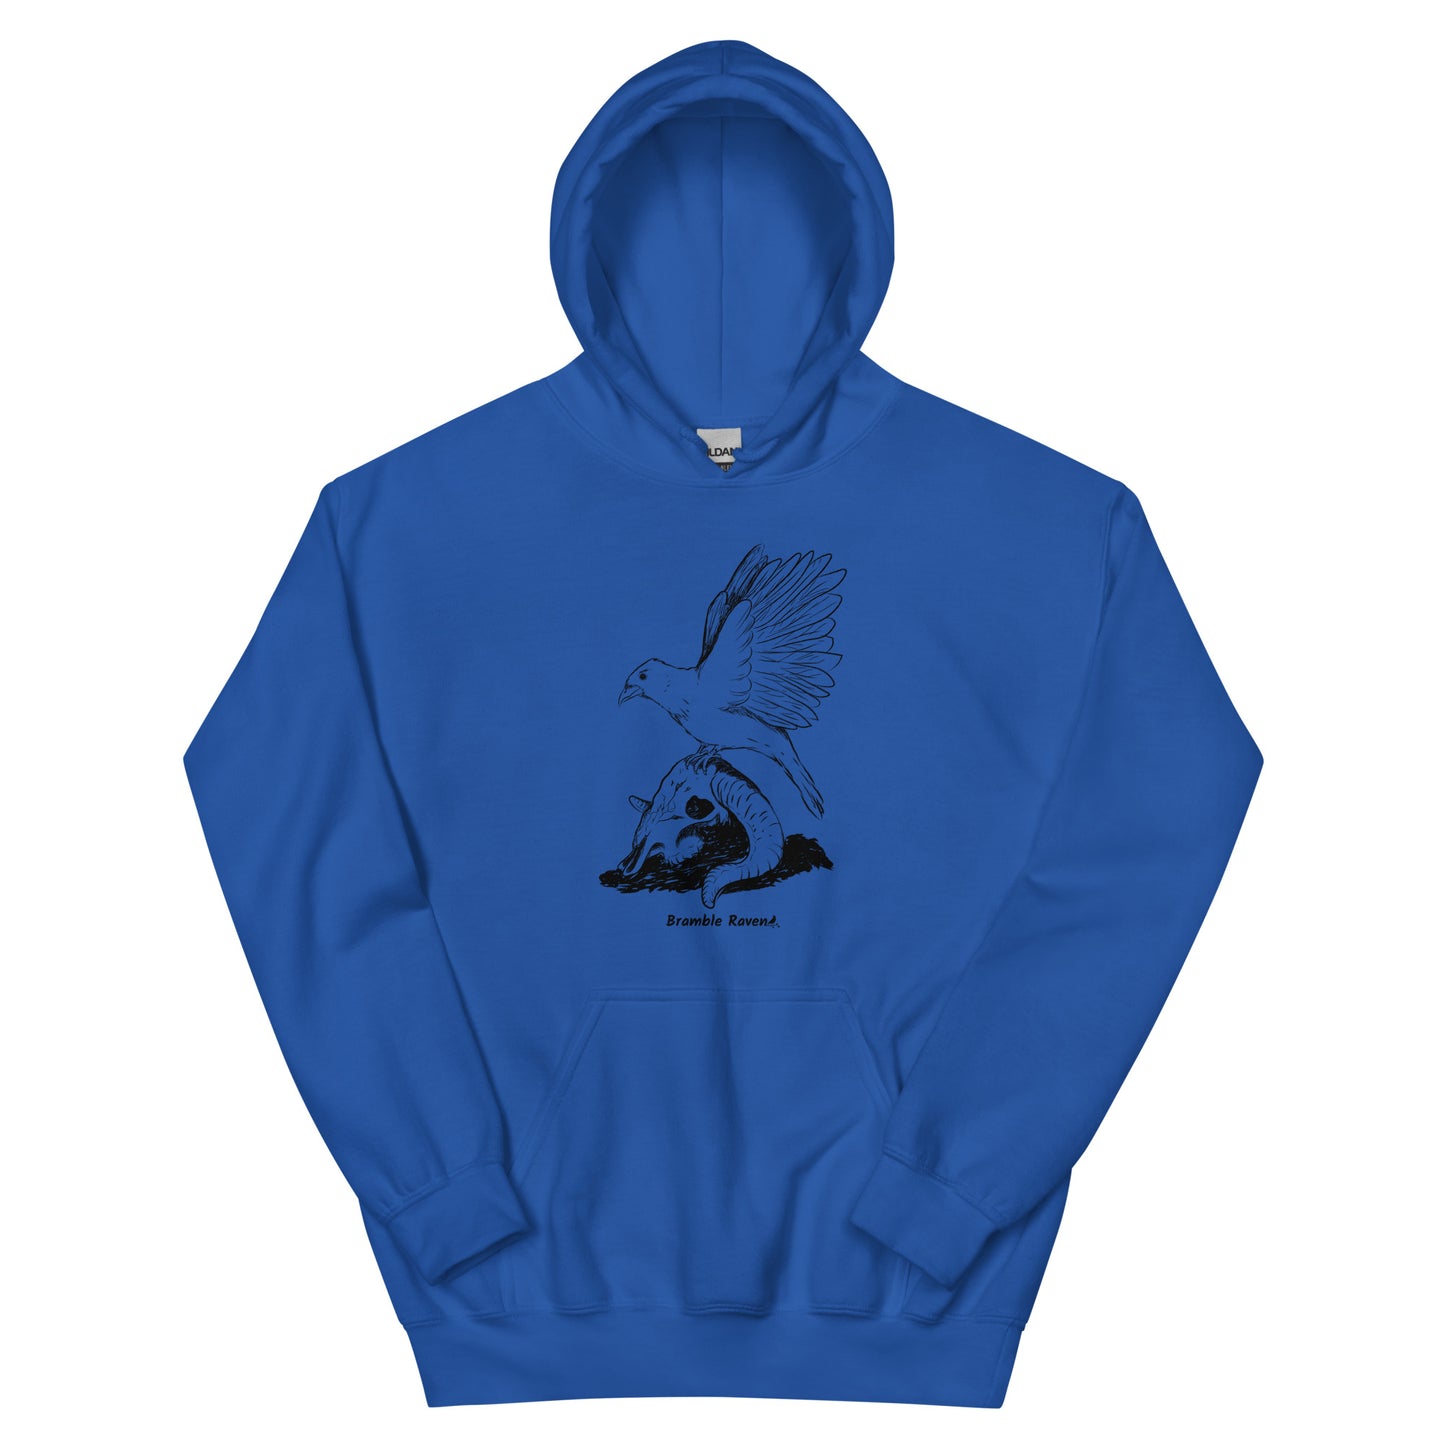 Royal blue colored unisex Reflections hoodie. Features image of a crow with wings outstretched sitting on a sheep skull.  Has a front pouch pocket and double lined hood.